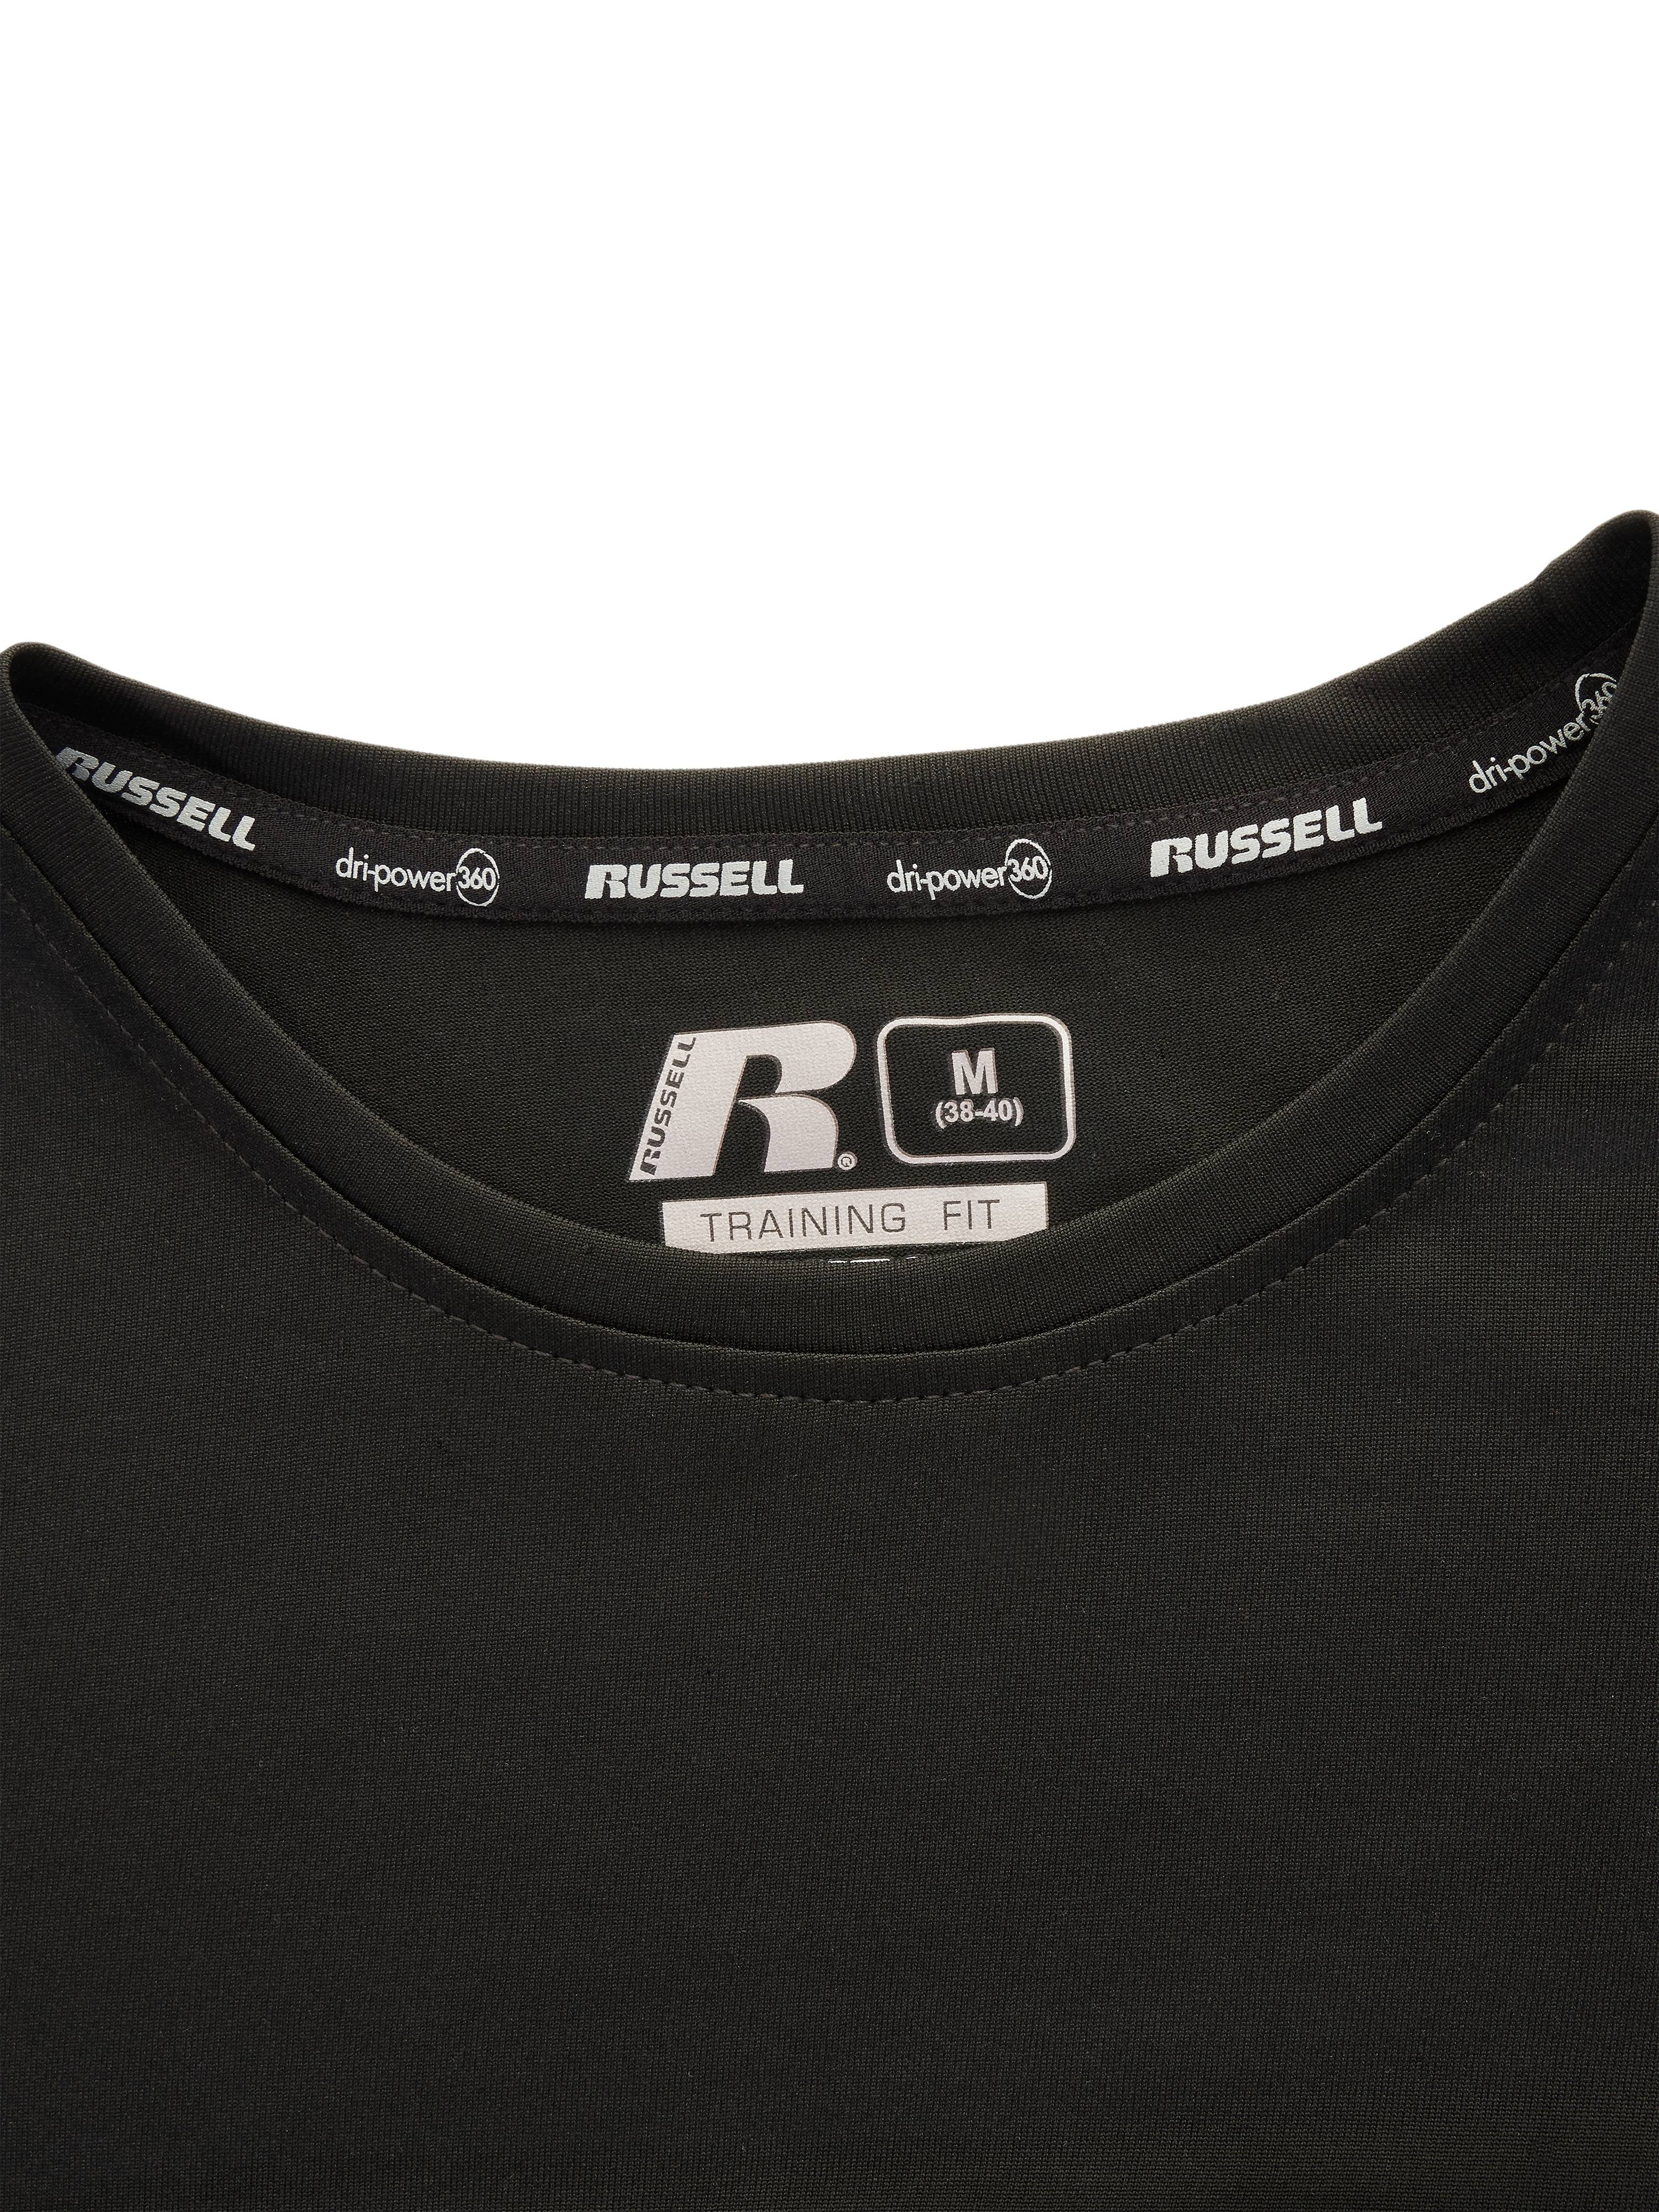 russell training fit t shirt